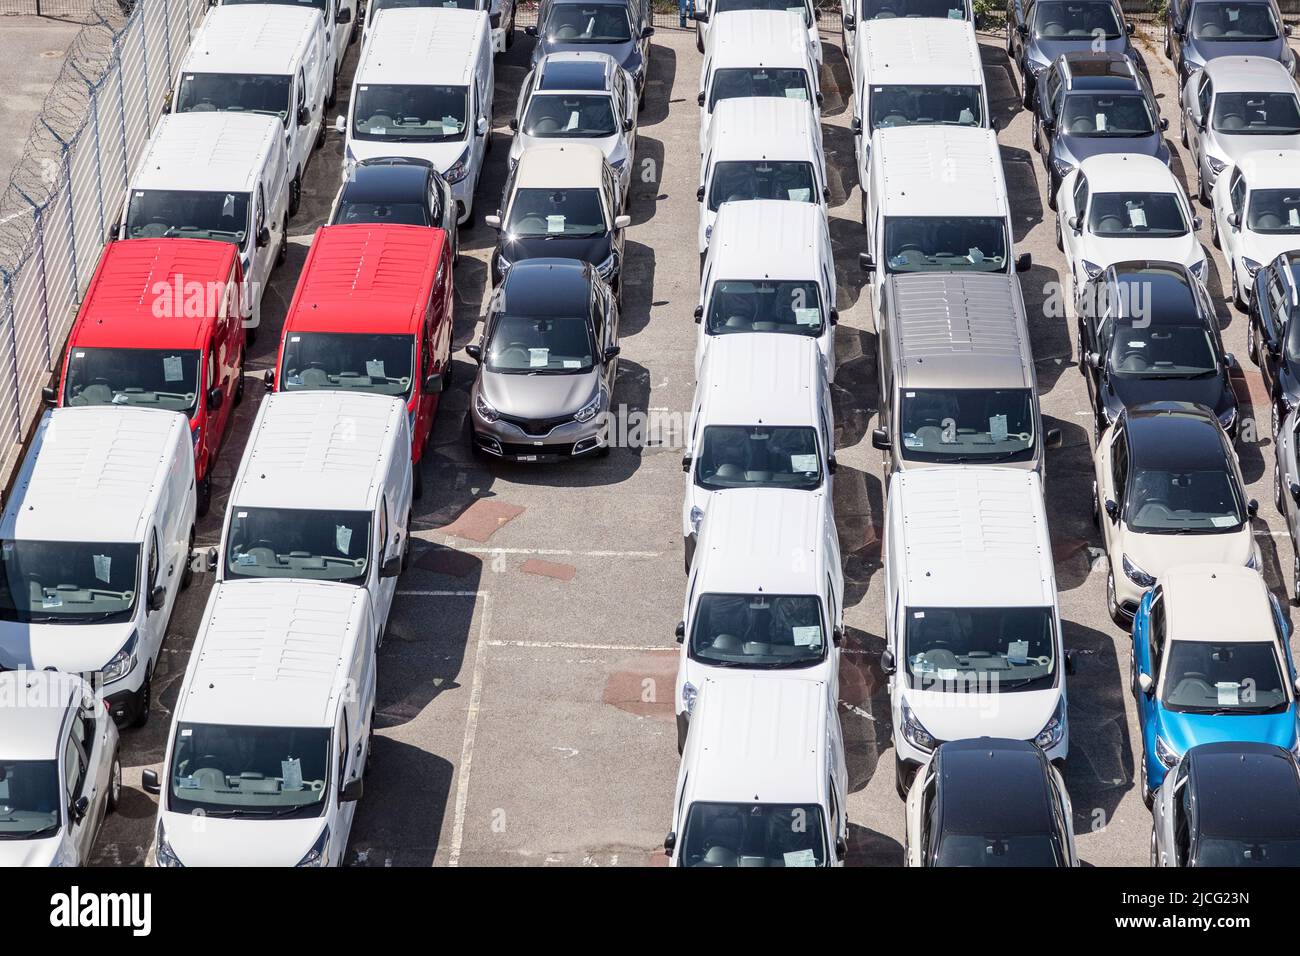 Loading station of cars Stock Photo